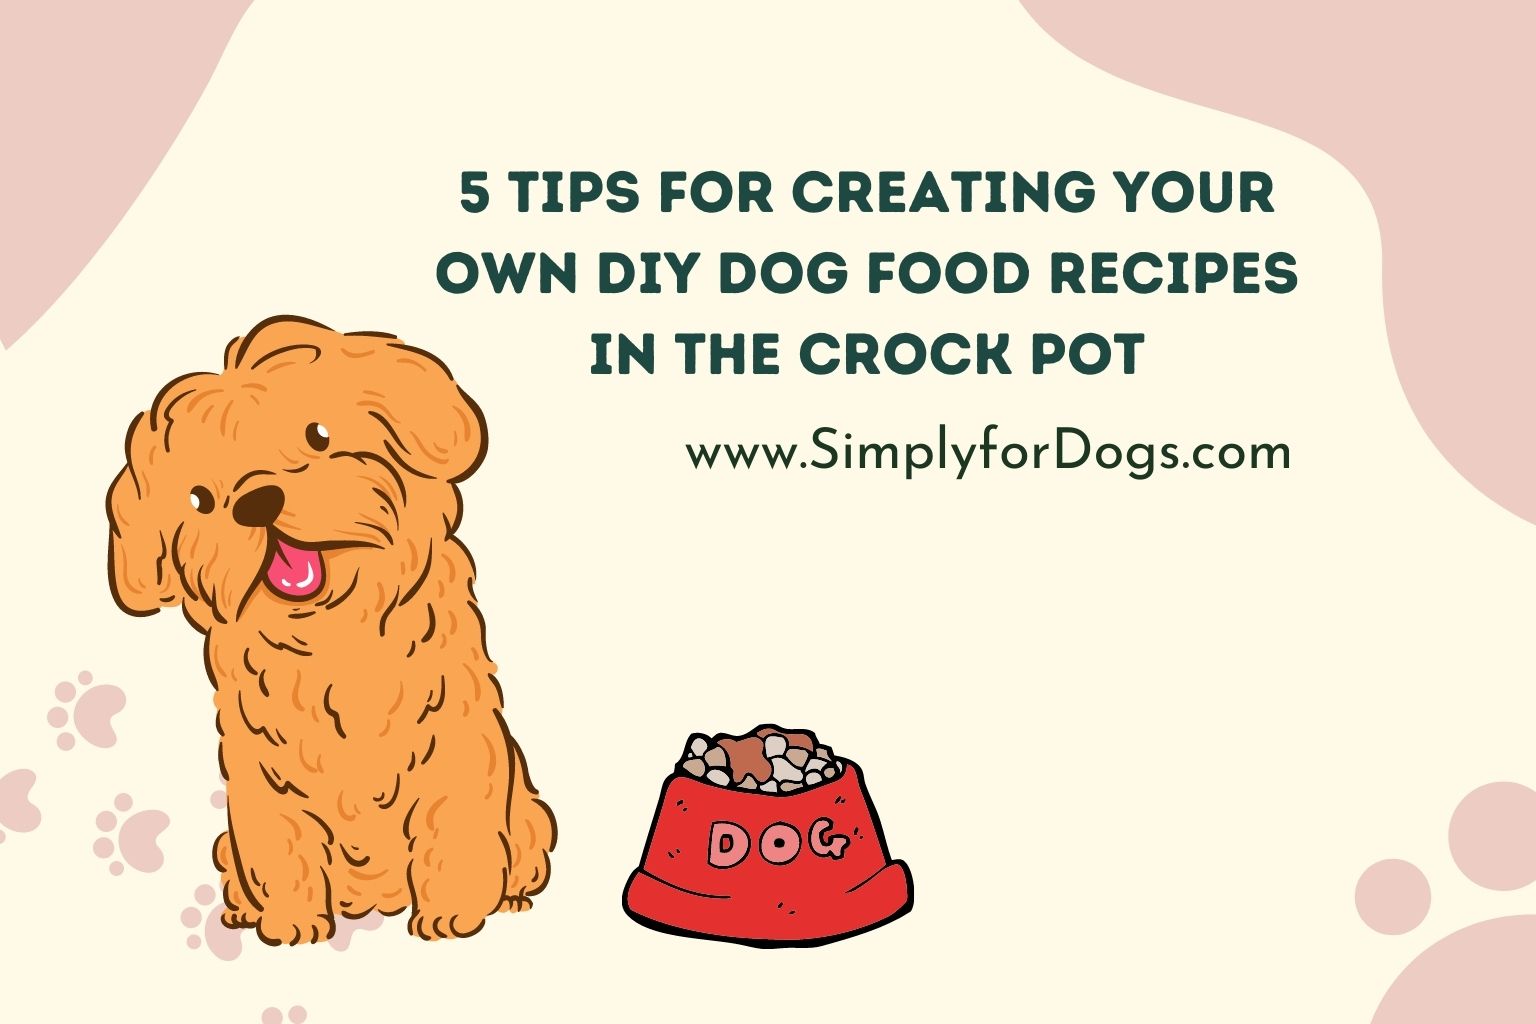 5 Tips for Creating Your Own DIY Dog Food Recipes in the Crock Pot